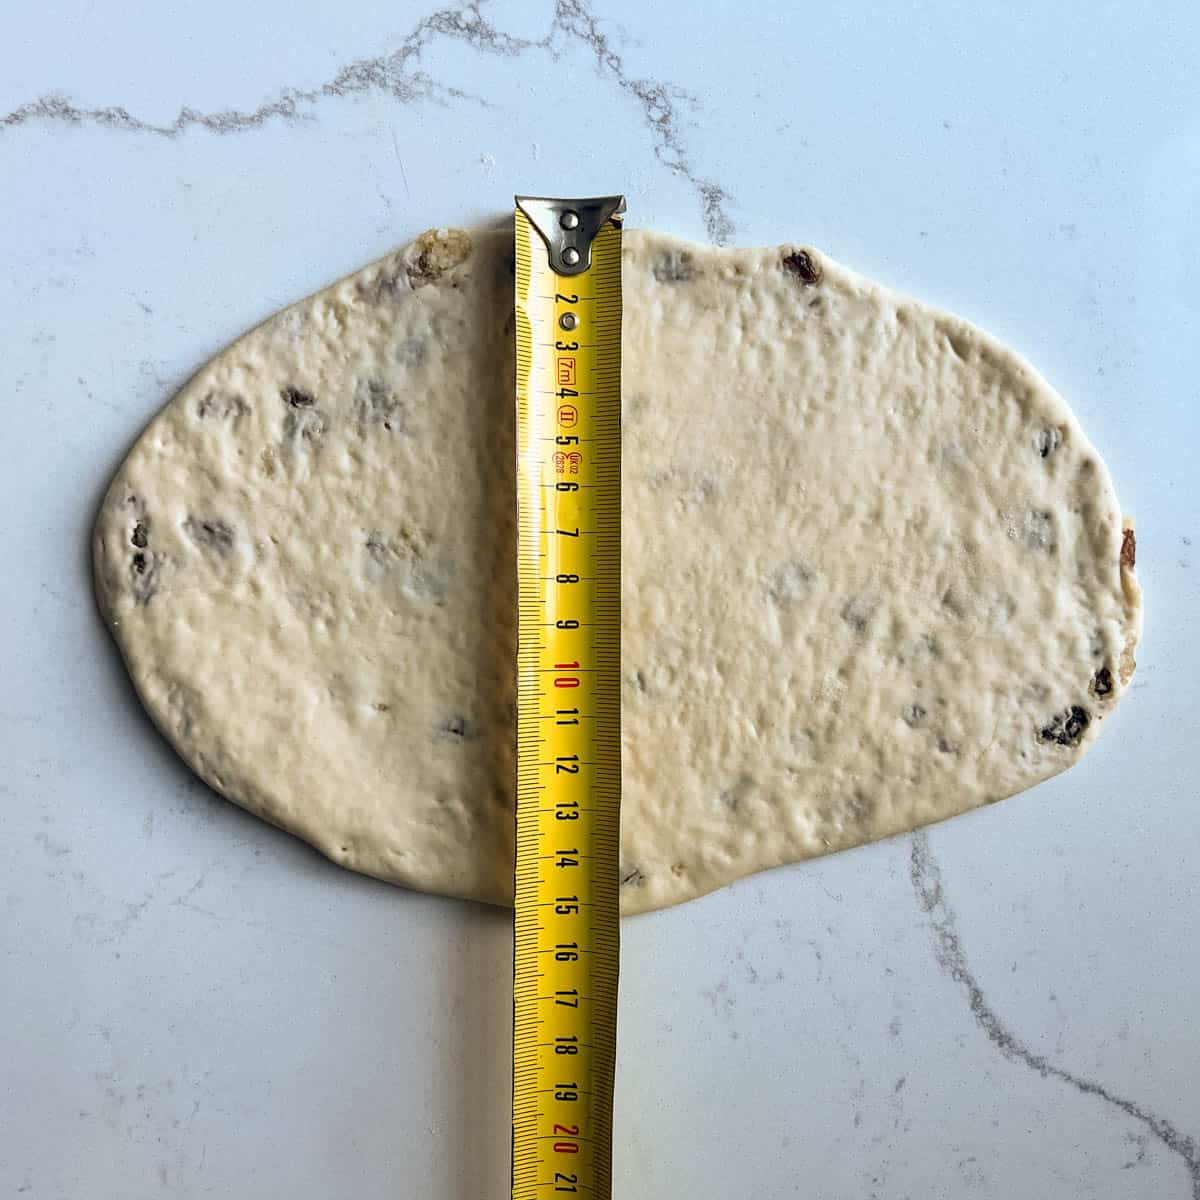 Measuring the width of the naan.